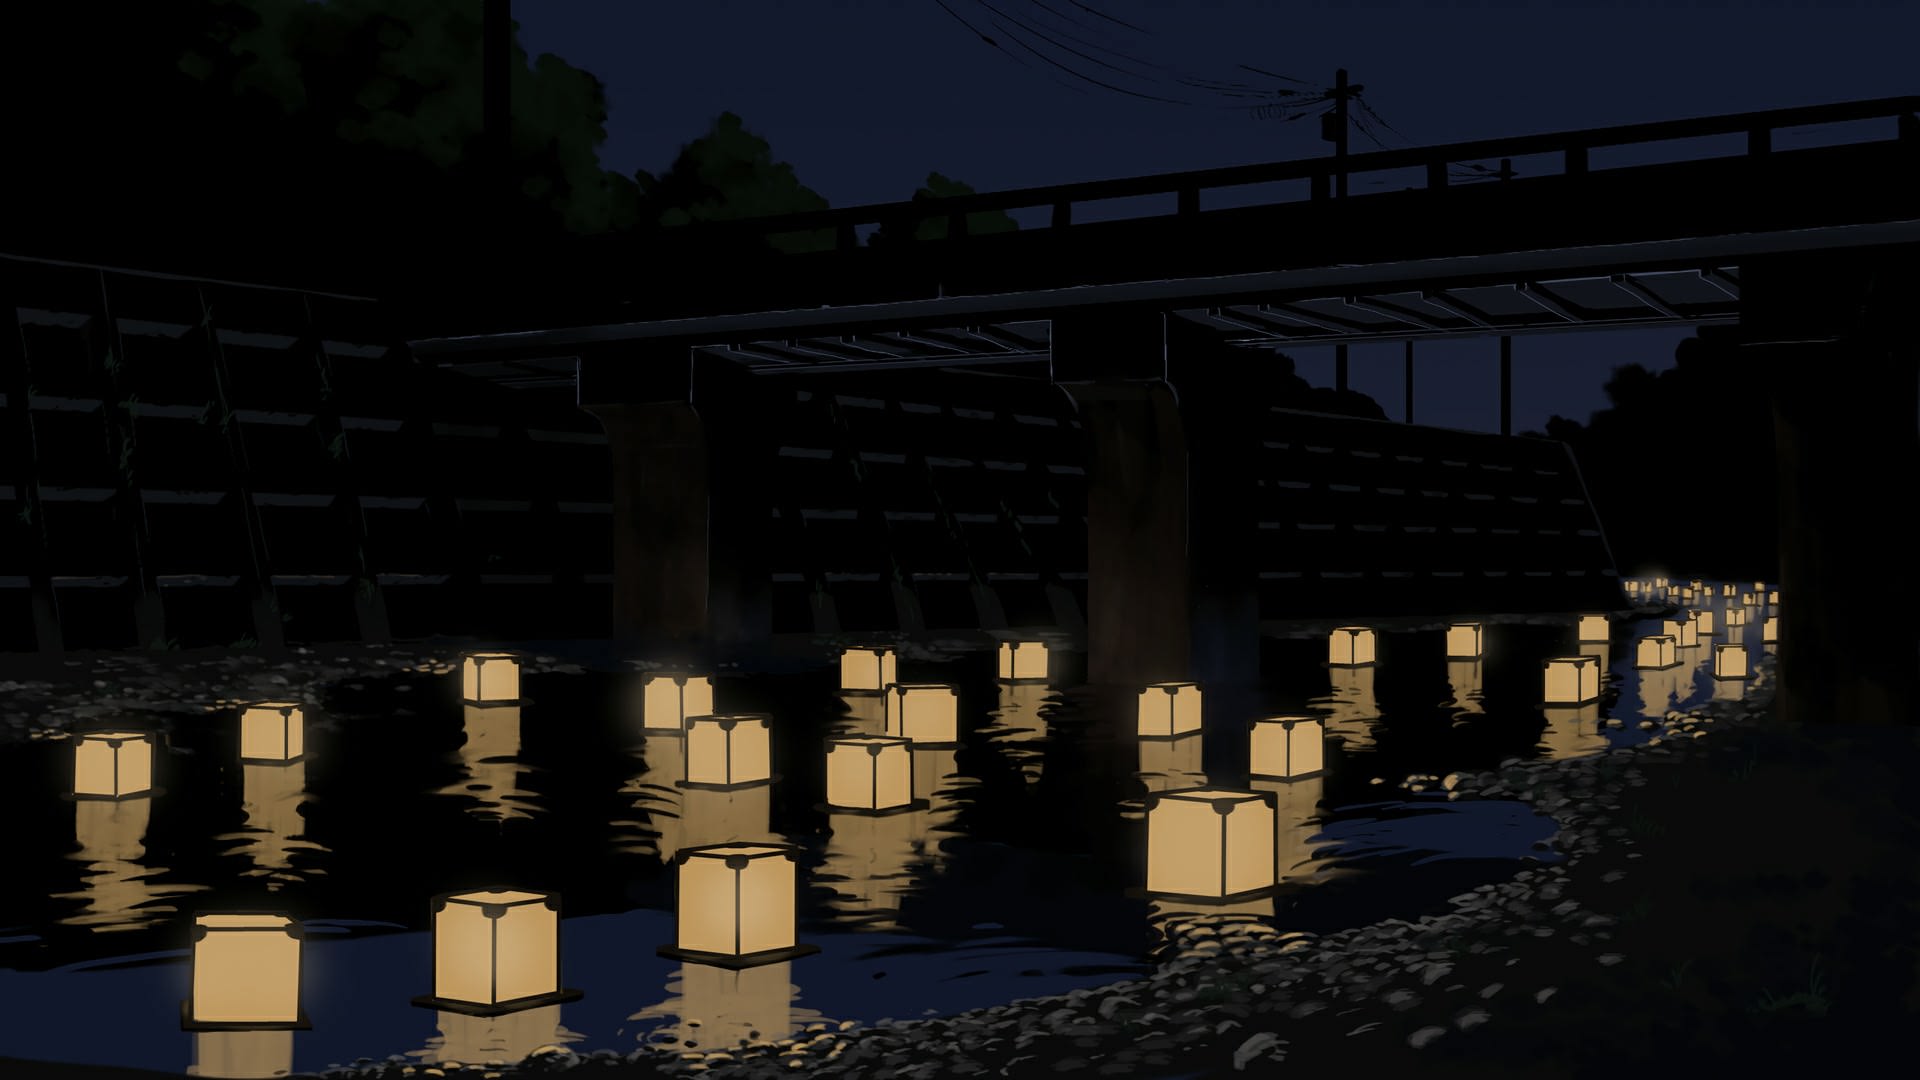 A bunch of lanterns floating in the water - Night